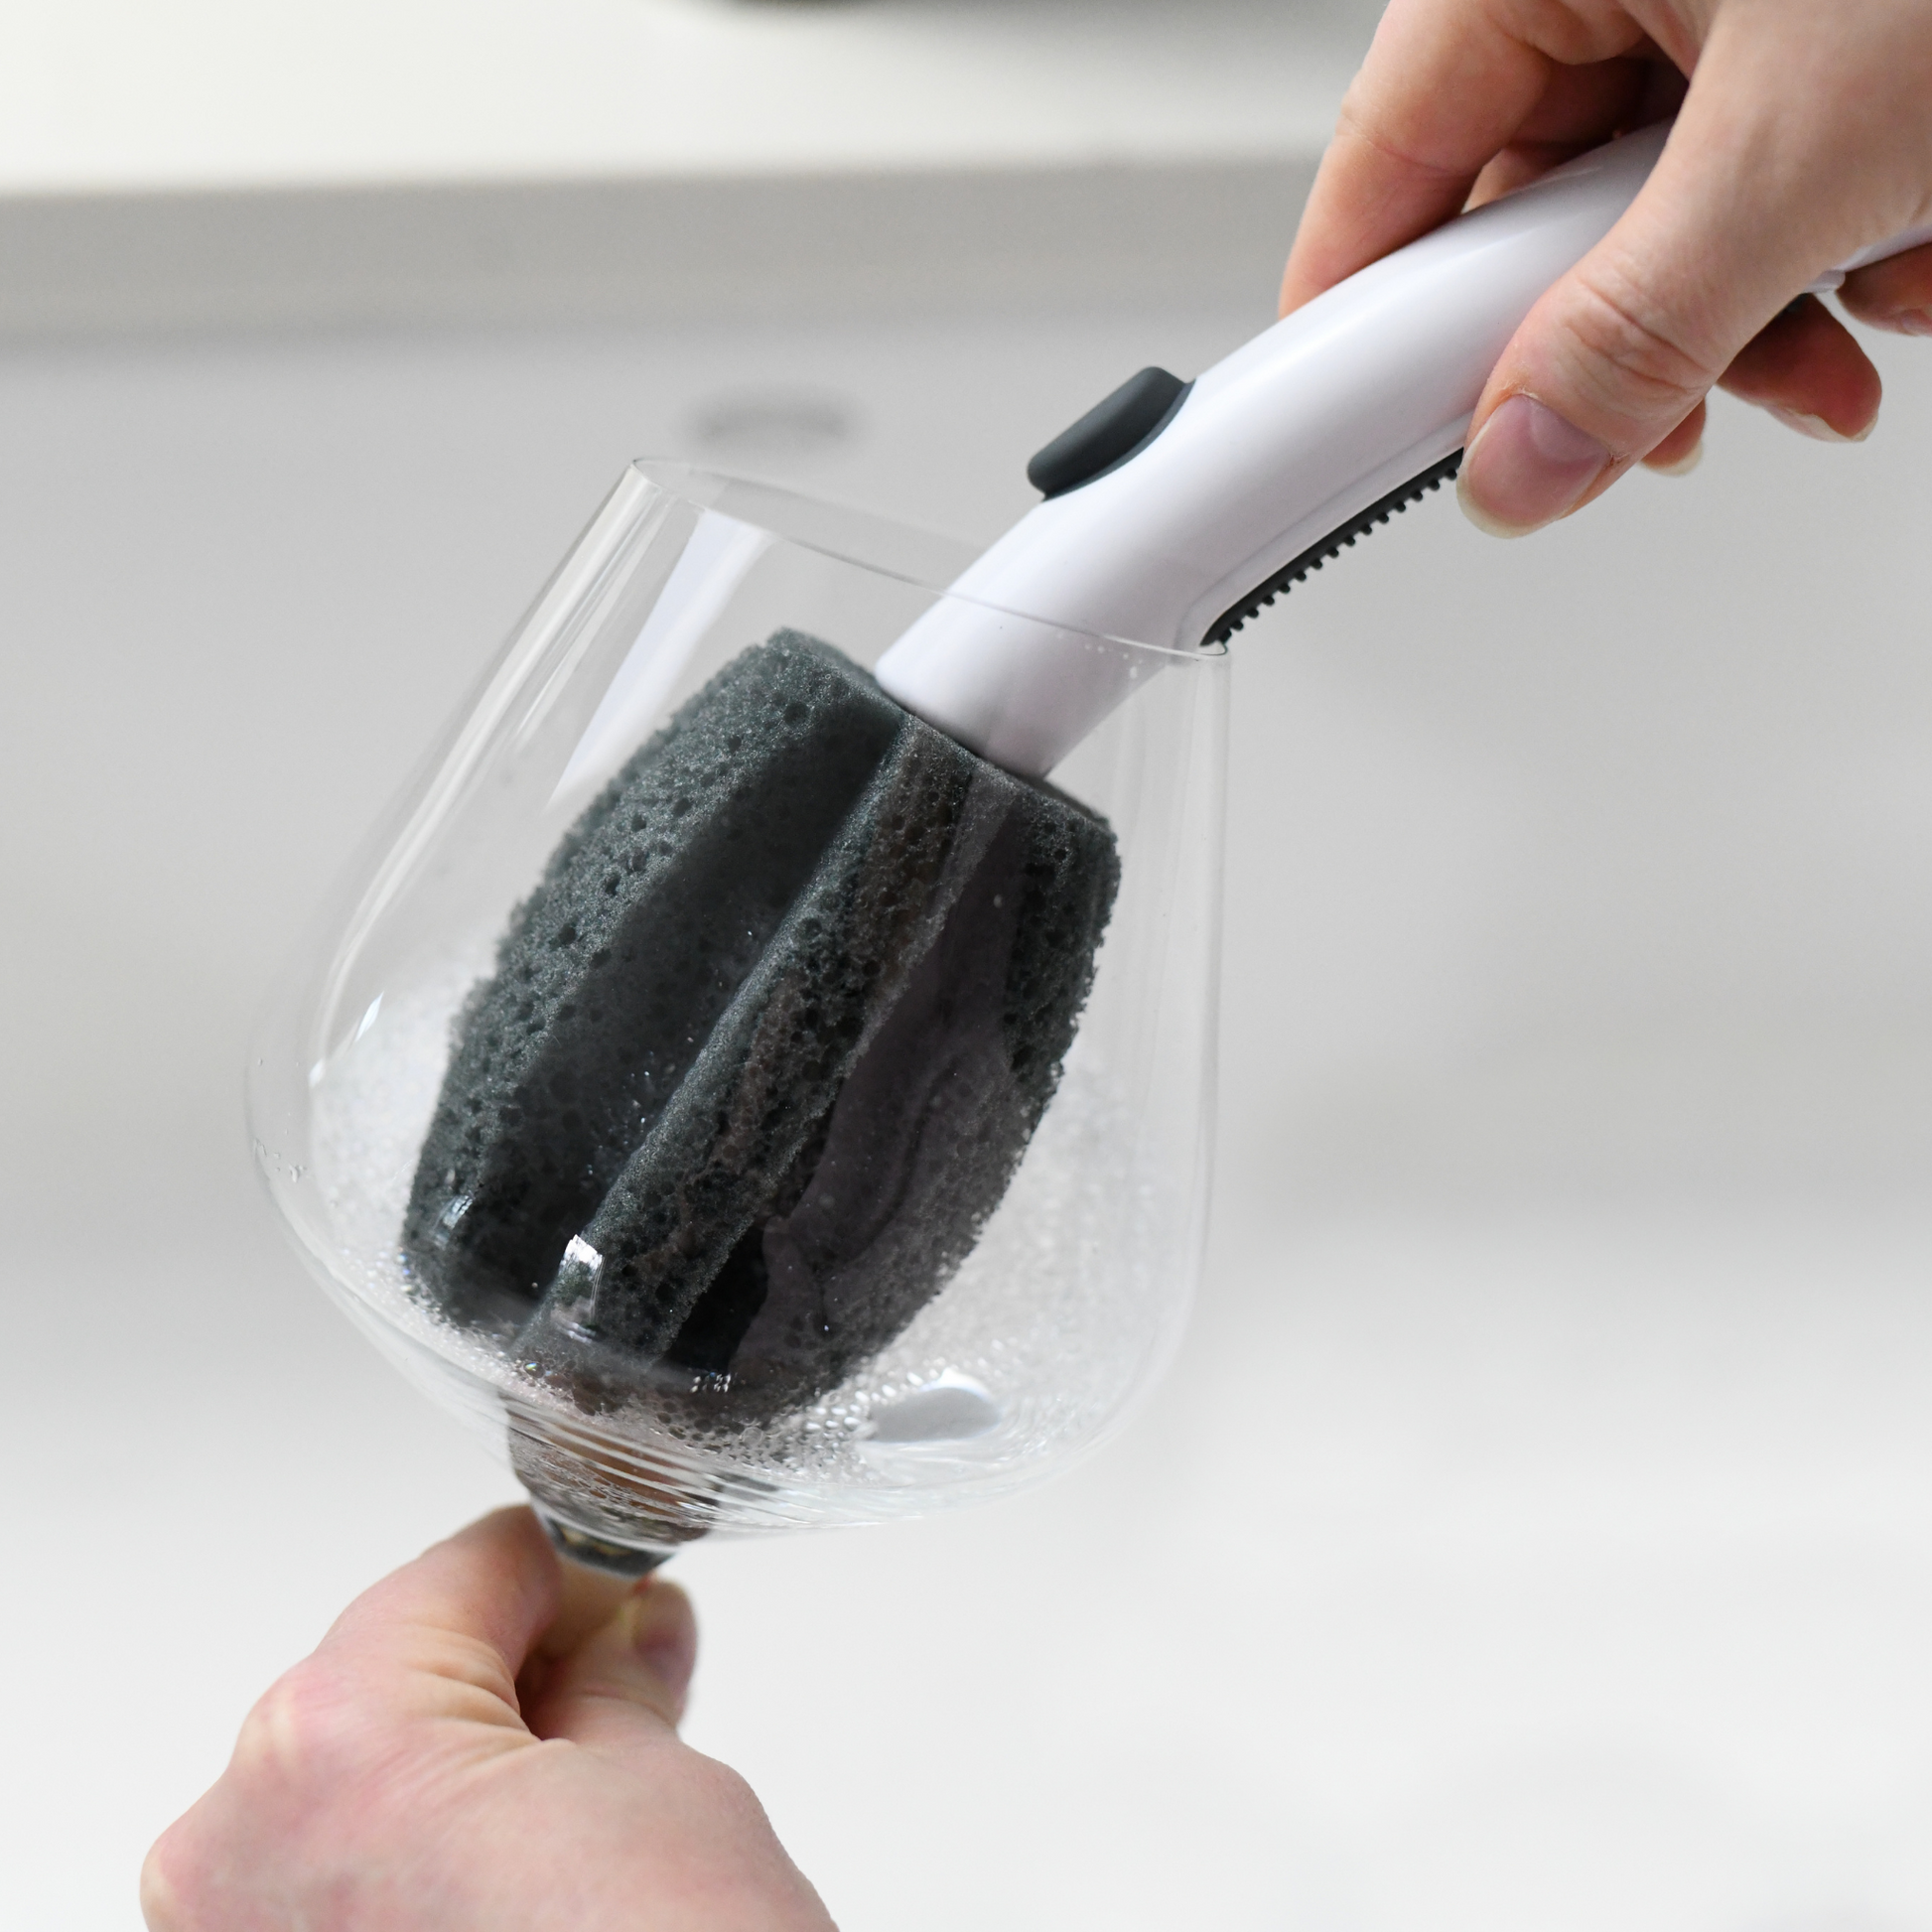 Easily cleans both large and small wine glasses